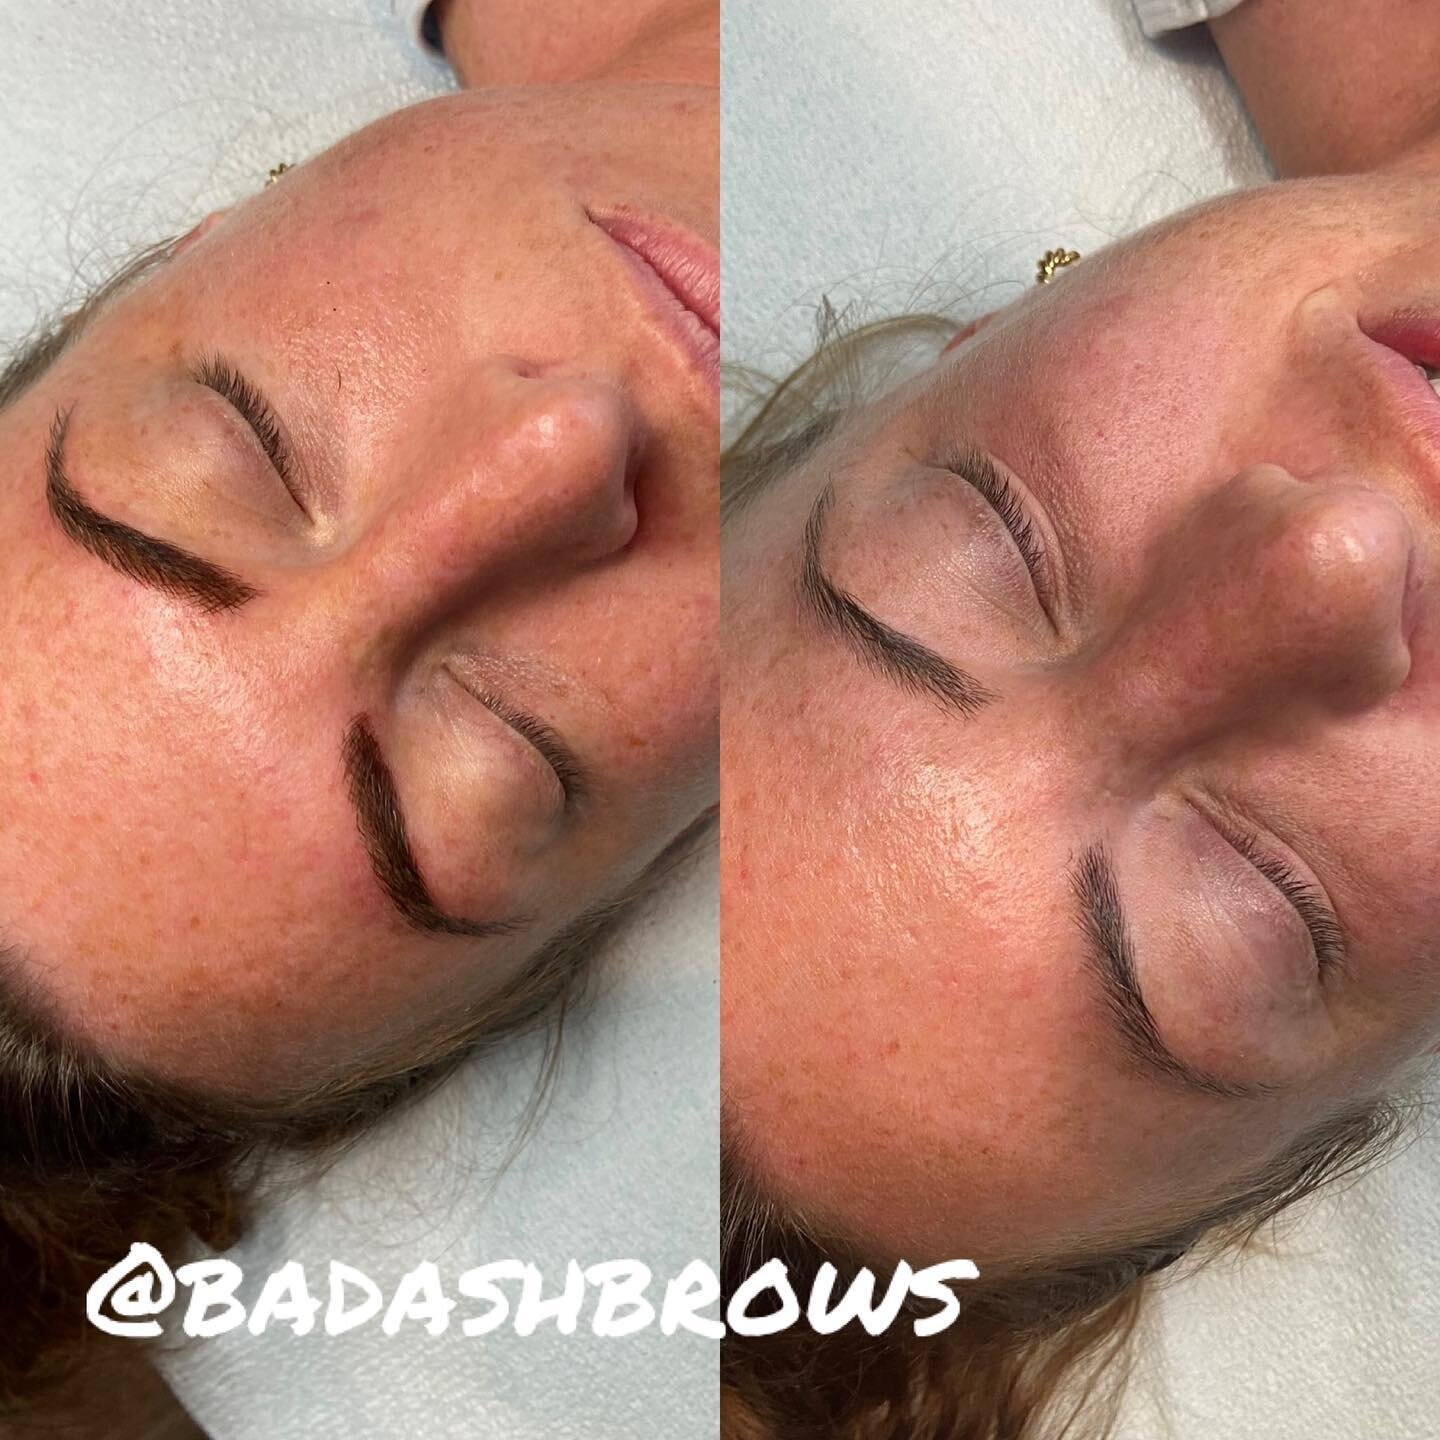 This Beauty already had amazing brows. She just wanted them sightly more defined and a little more density. The redness will subside as they heal. I can&rsquo;t wait until the touch up to see them! 
.
.
.
#browsonpoint #bladenshade #microblading #rev